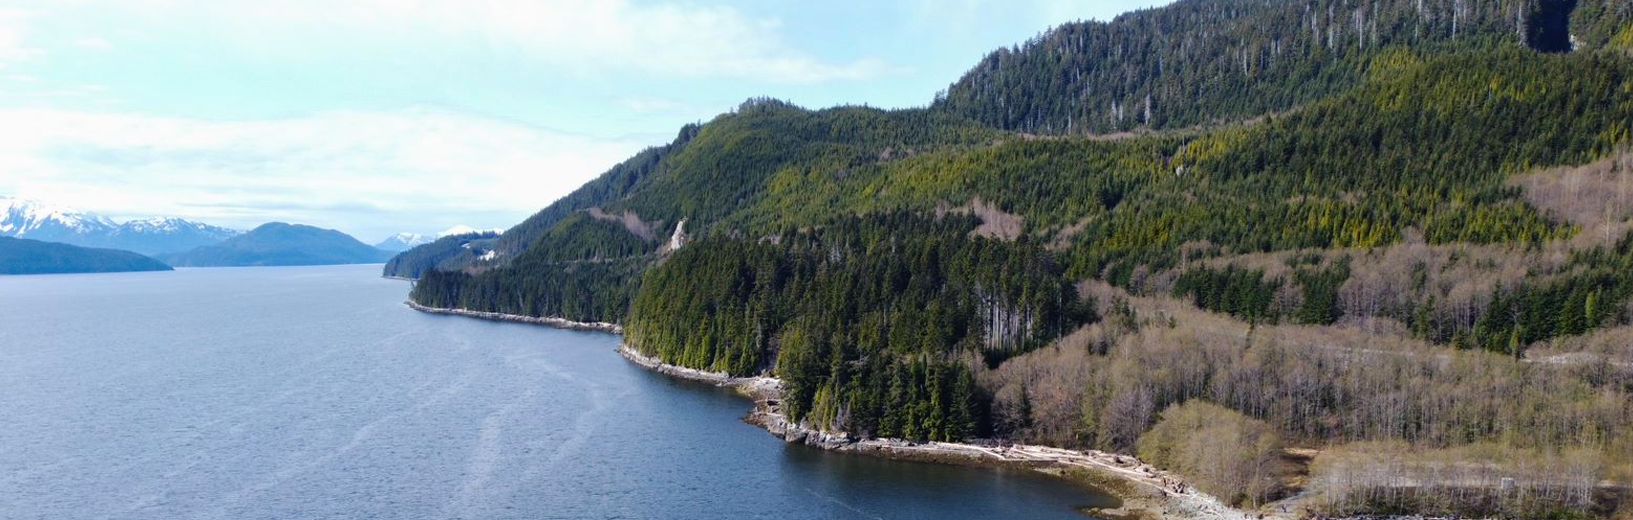 Cedar LNG Receives B.C. Environmental Approval and Signs Memorandum of Understanding with ARC Resources Ltd.